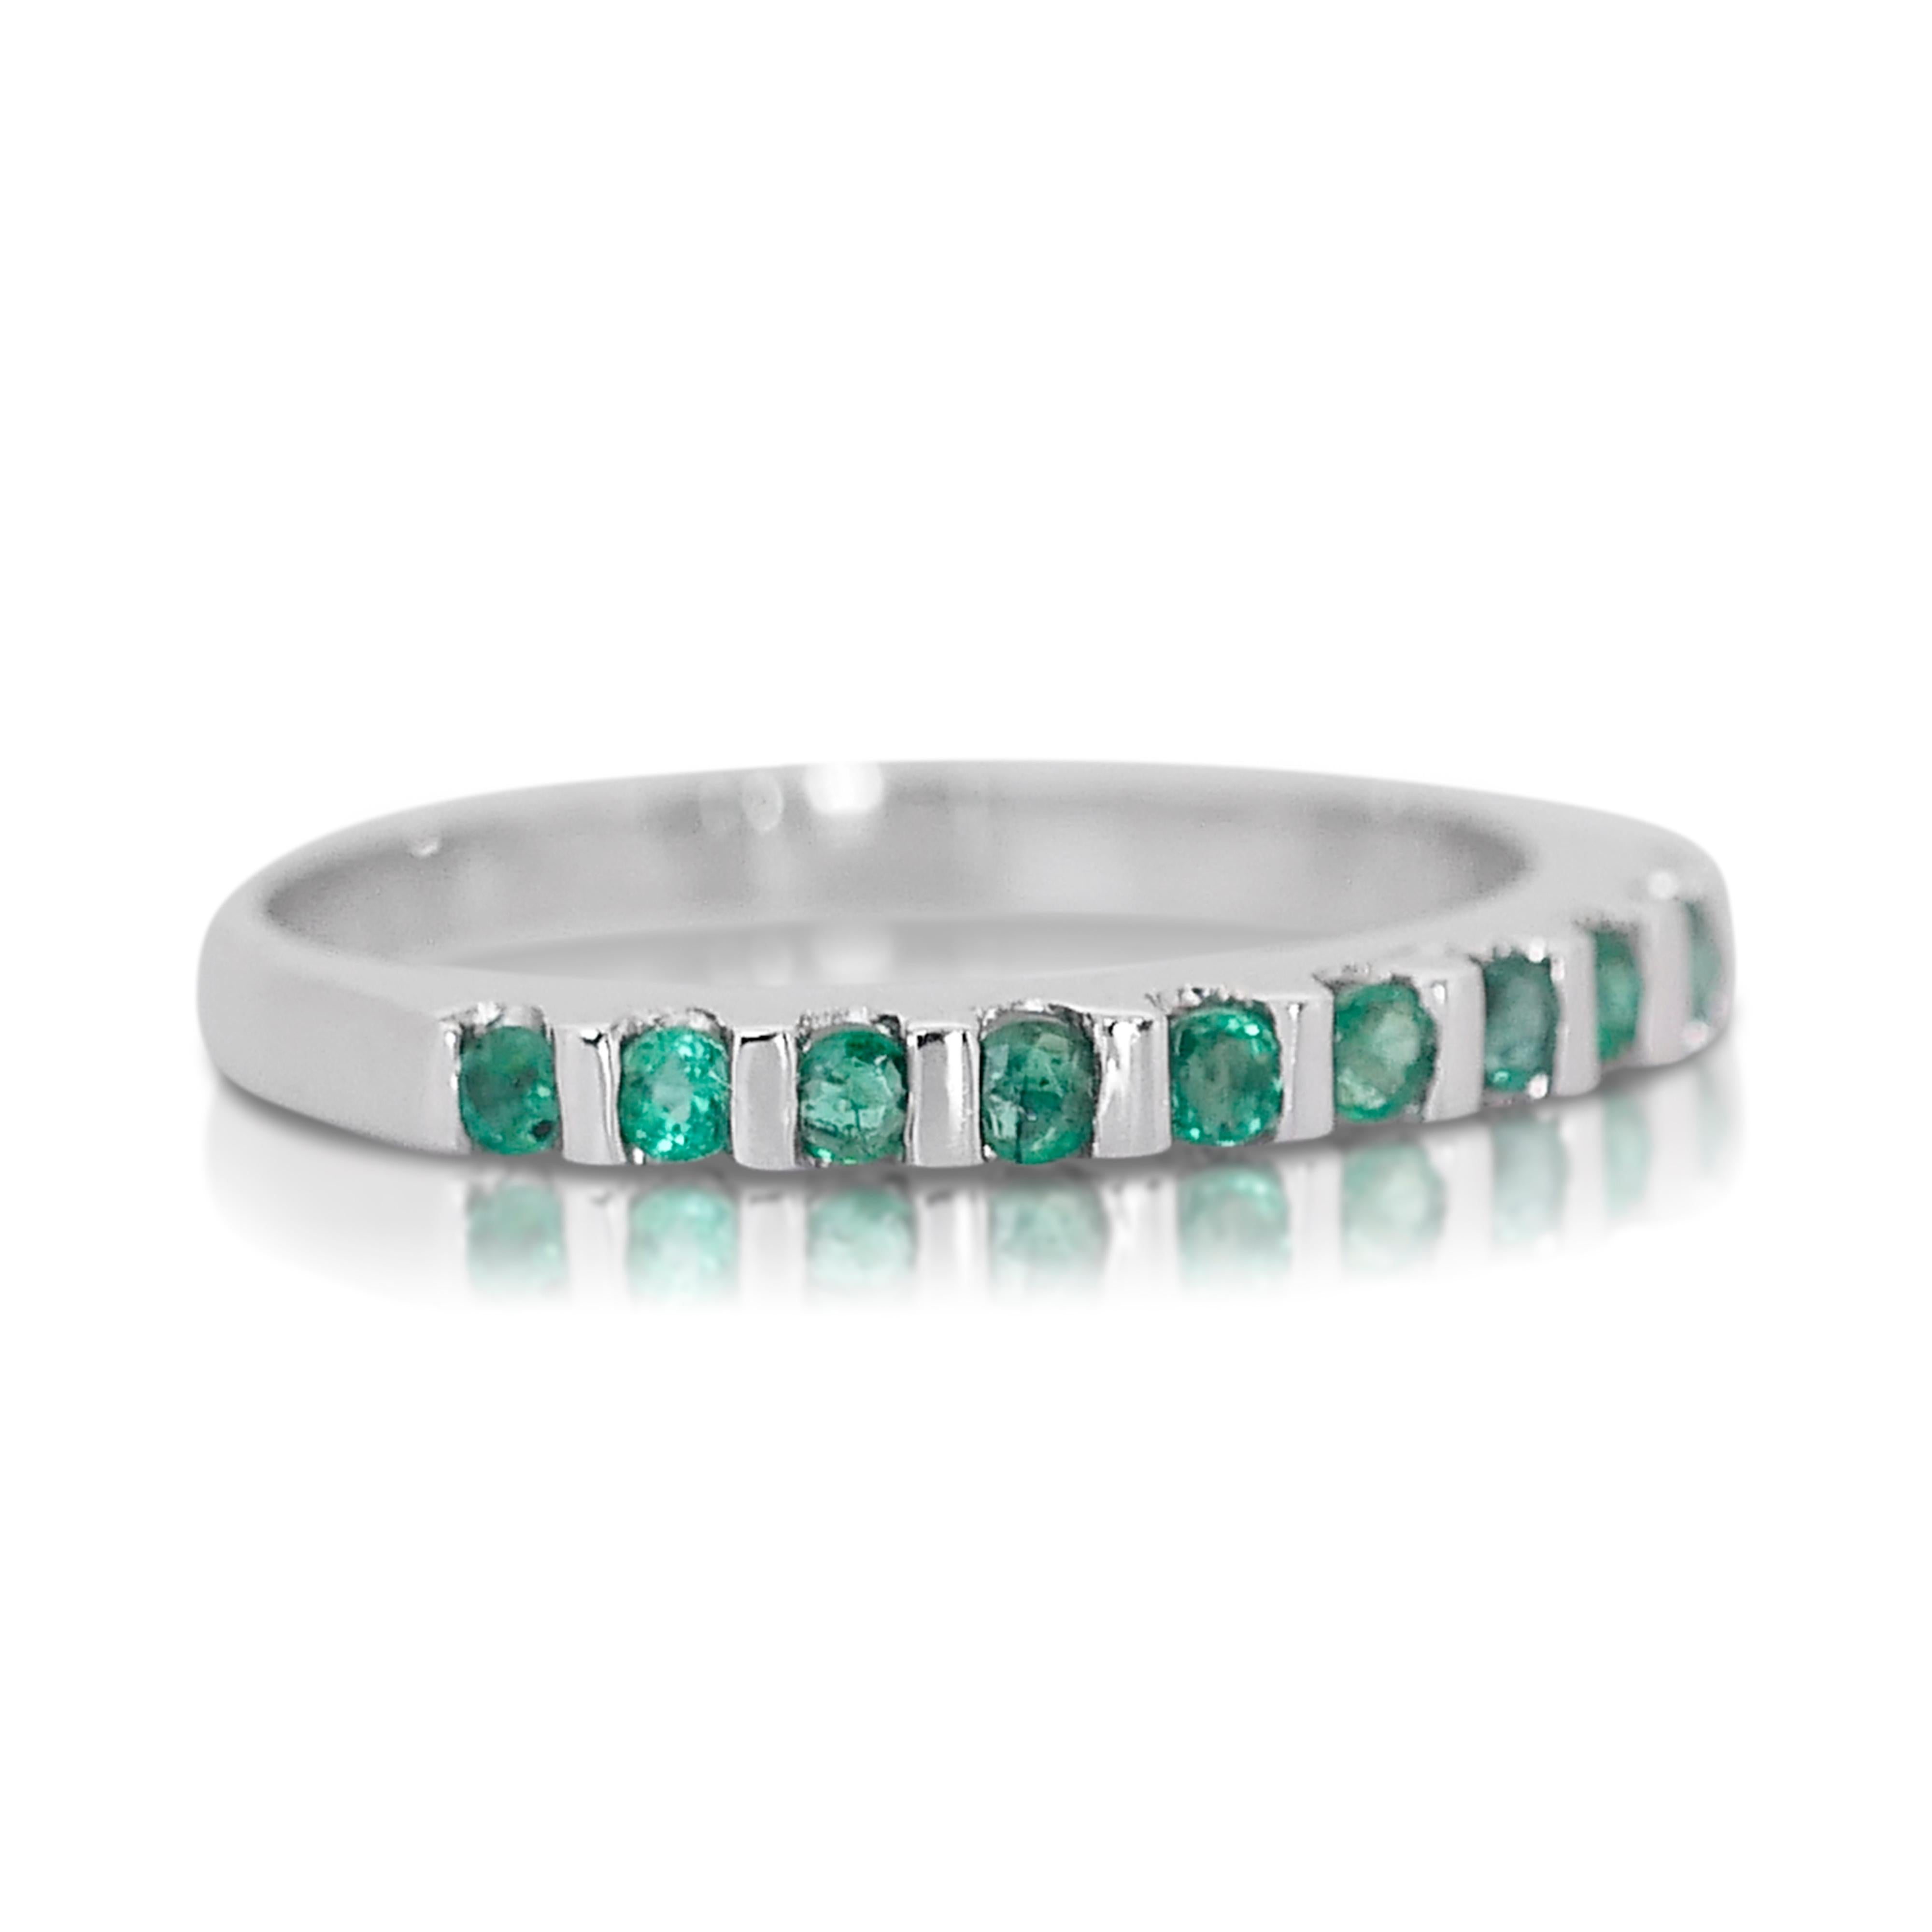 Dazzling 1.22 ct Emerald, Sapphire, Ruby, & Diamond Band Rings in 14k White Gold For Sale 4